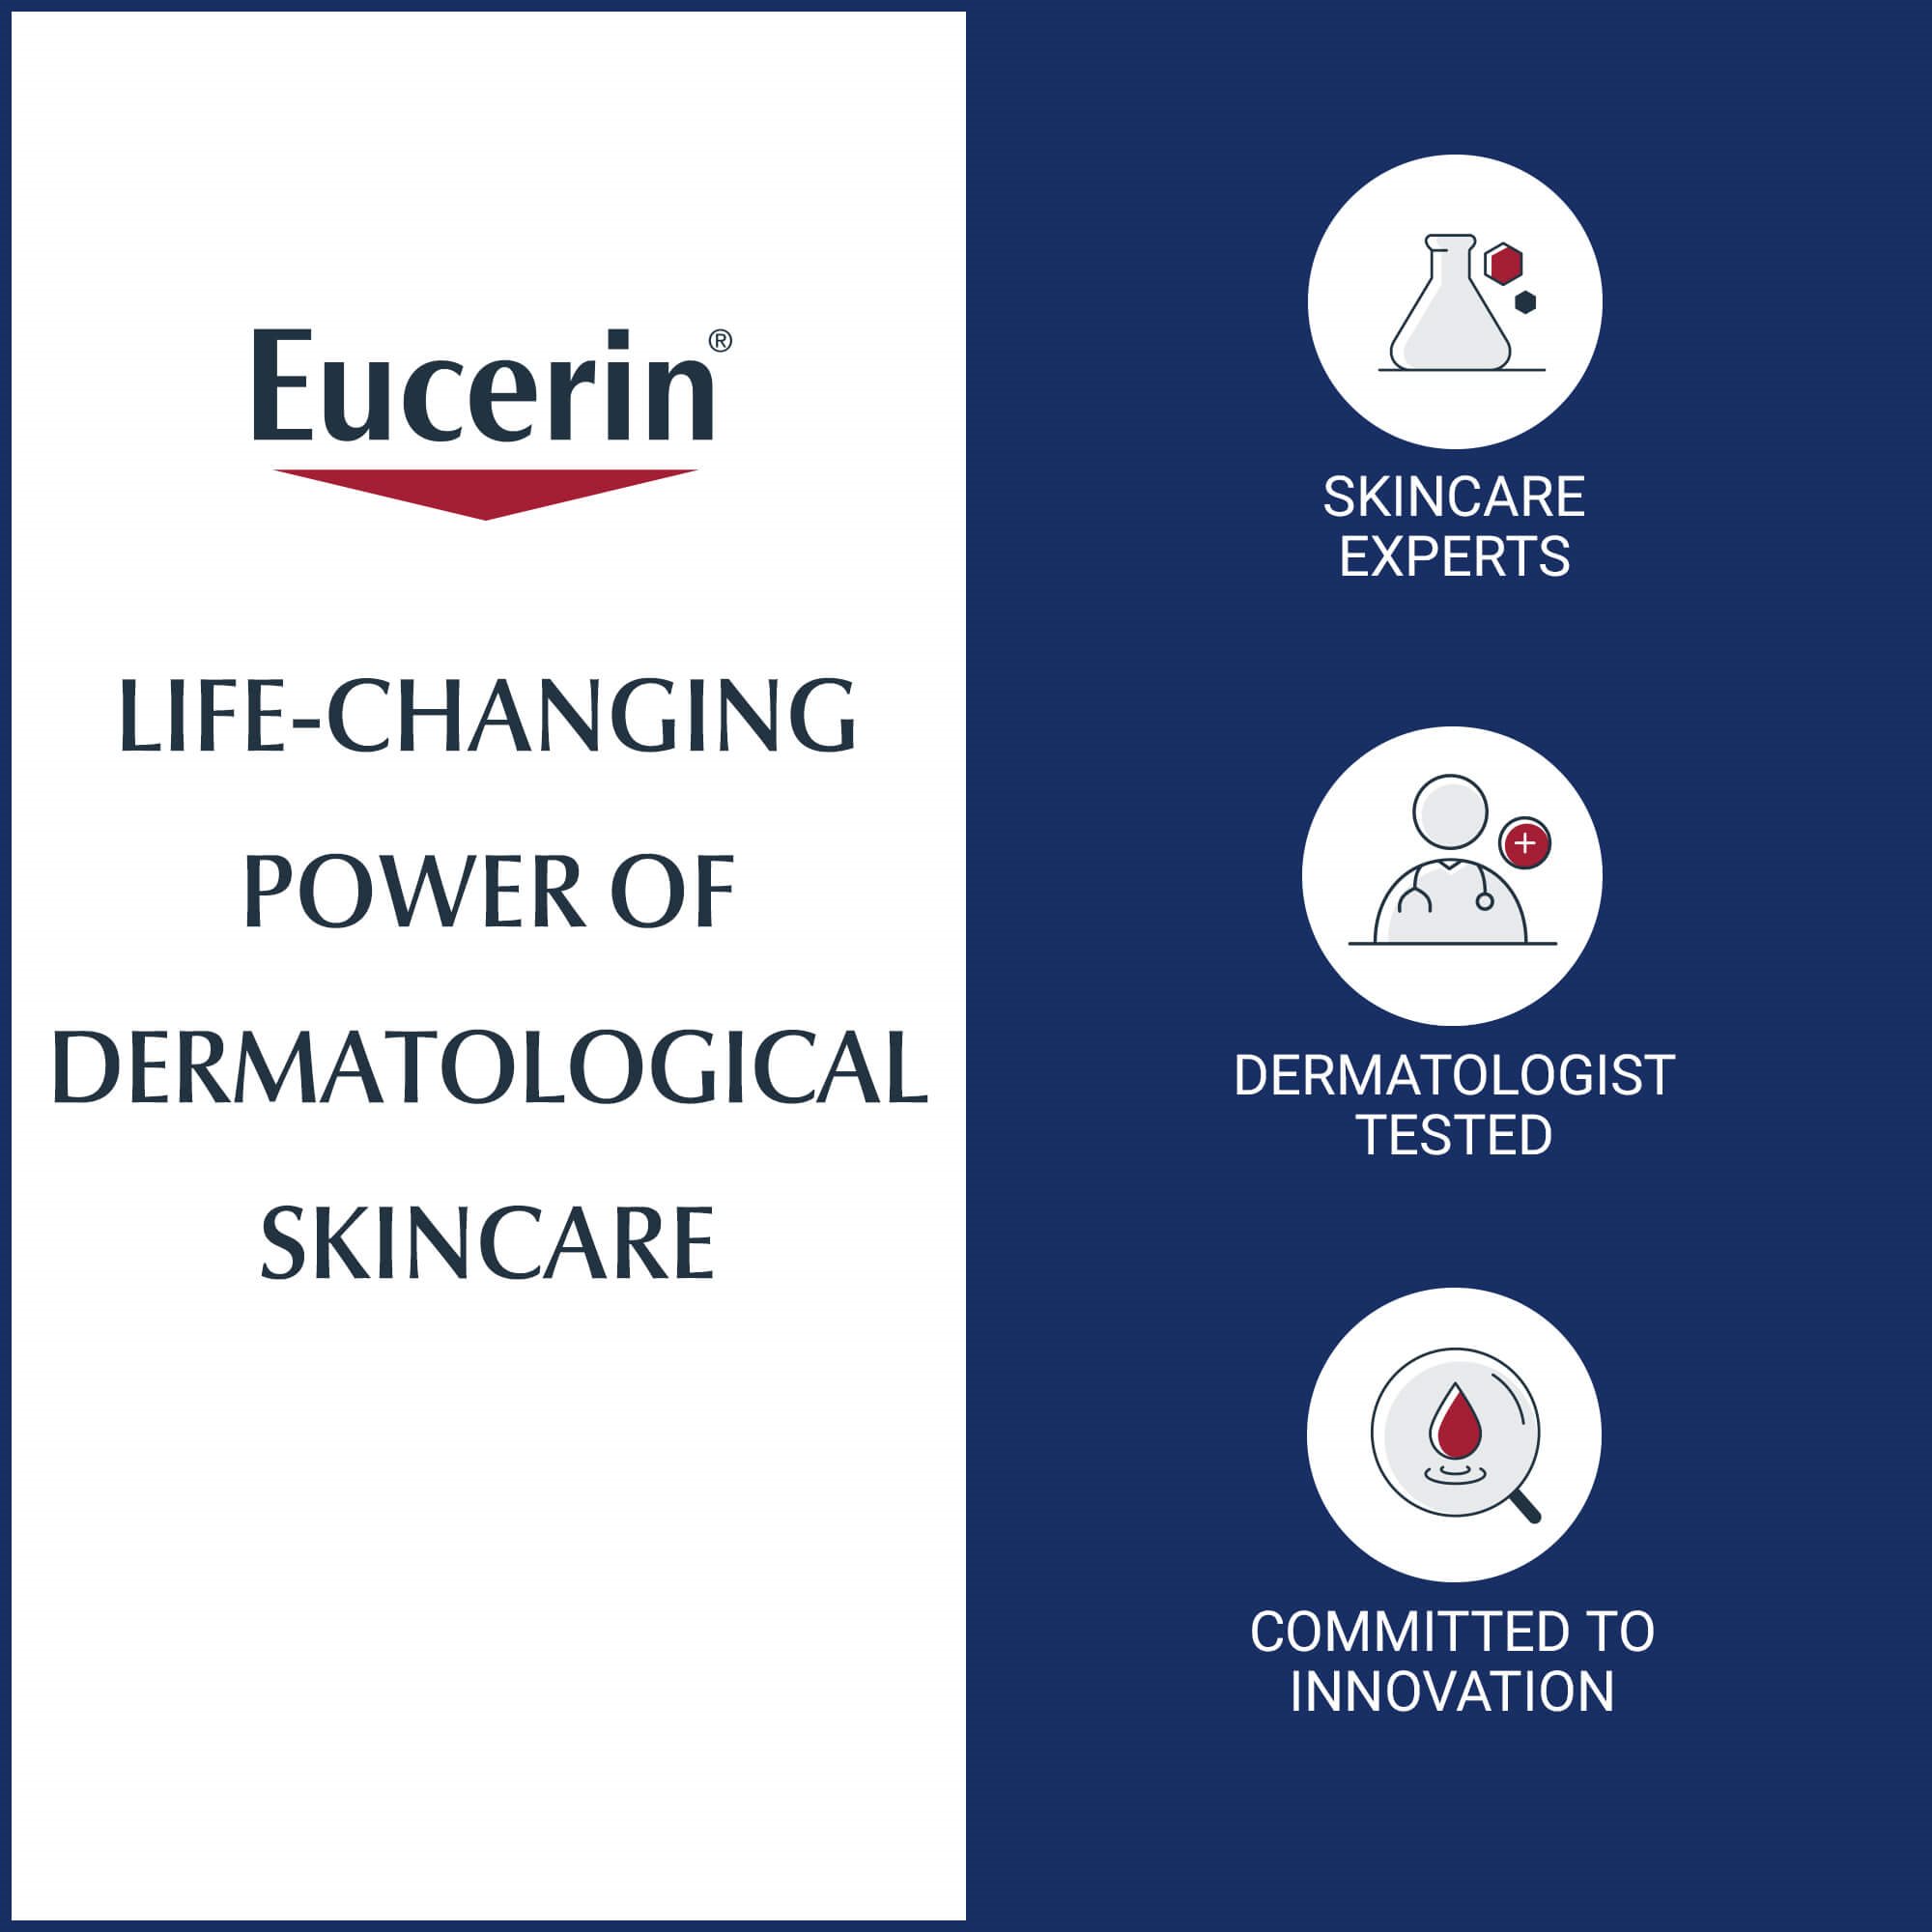 An image describing the advantages of using Eucerin skin care, such as dermatologist tested